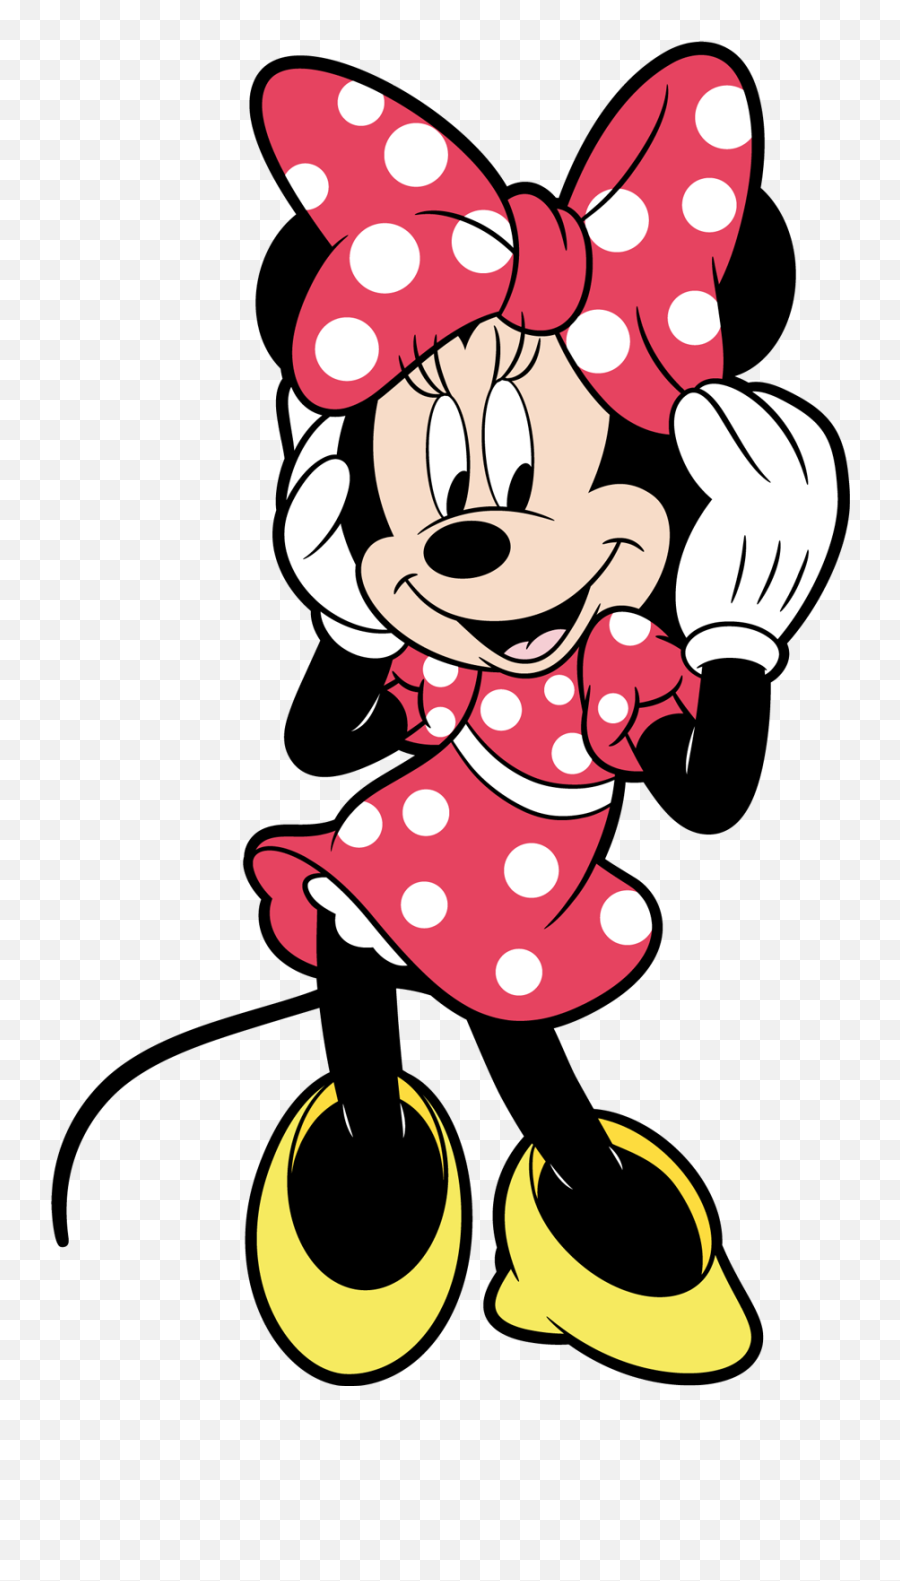 Mickey Mouse And Friends - Minnie Mouse Figpin Enamel Pin By Minnie Mouse Png,Minnie Mouse Face Png